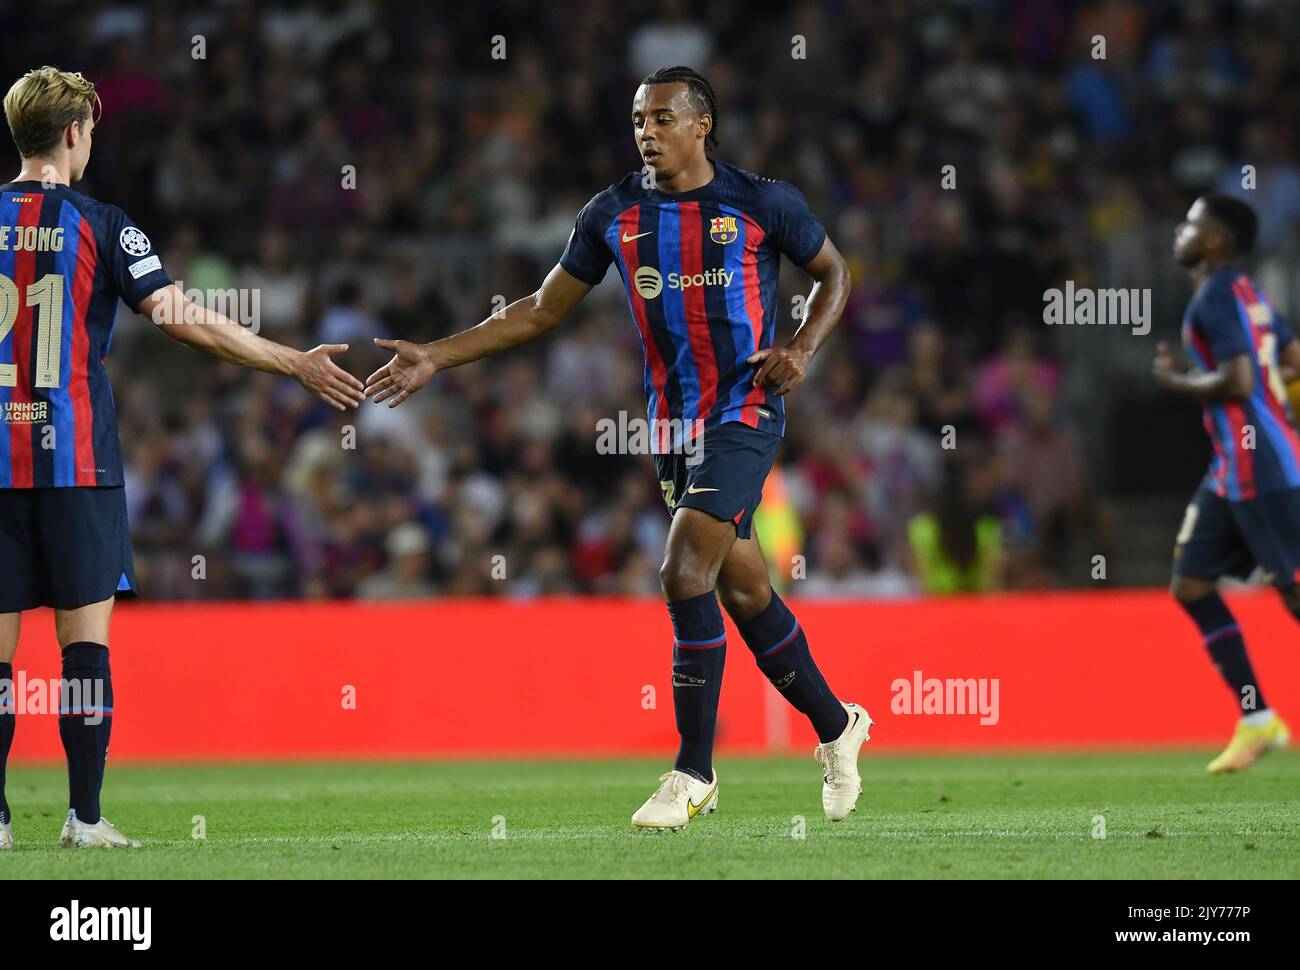 Barcelona, Spain. 07th Sep, 2022. Jules Kounde (23) of FC Barcelona during the match between FC Barcelona and FC Viktoria Plzen corresponding to the first day of the group stage of the UEFA Champions League at Spotify Camp Nou Stadium in Barcelona, Spain. September 7, 2022. Credit: rosdemora/Alamy Live News Stock Photo